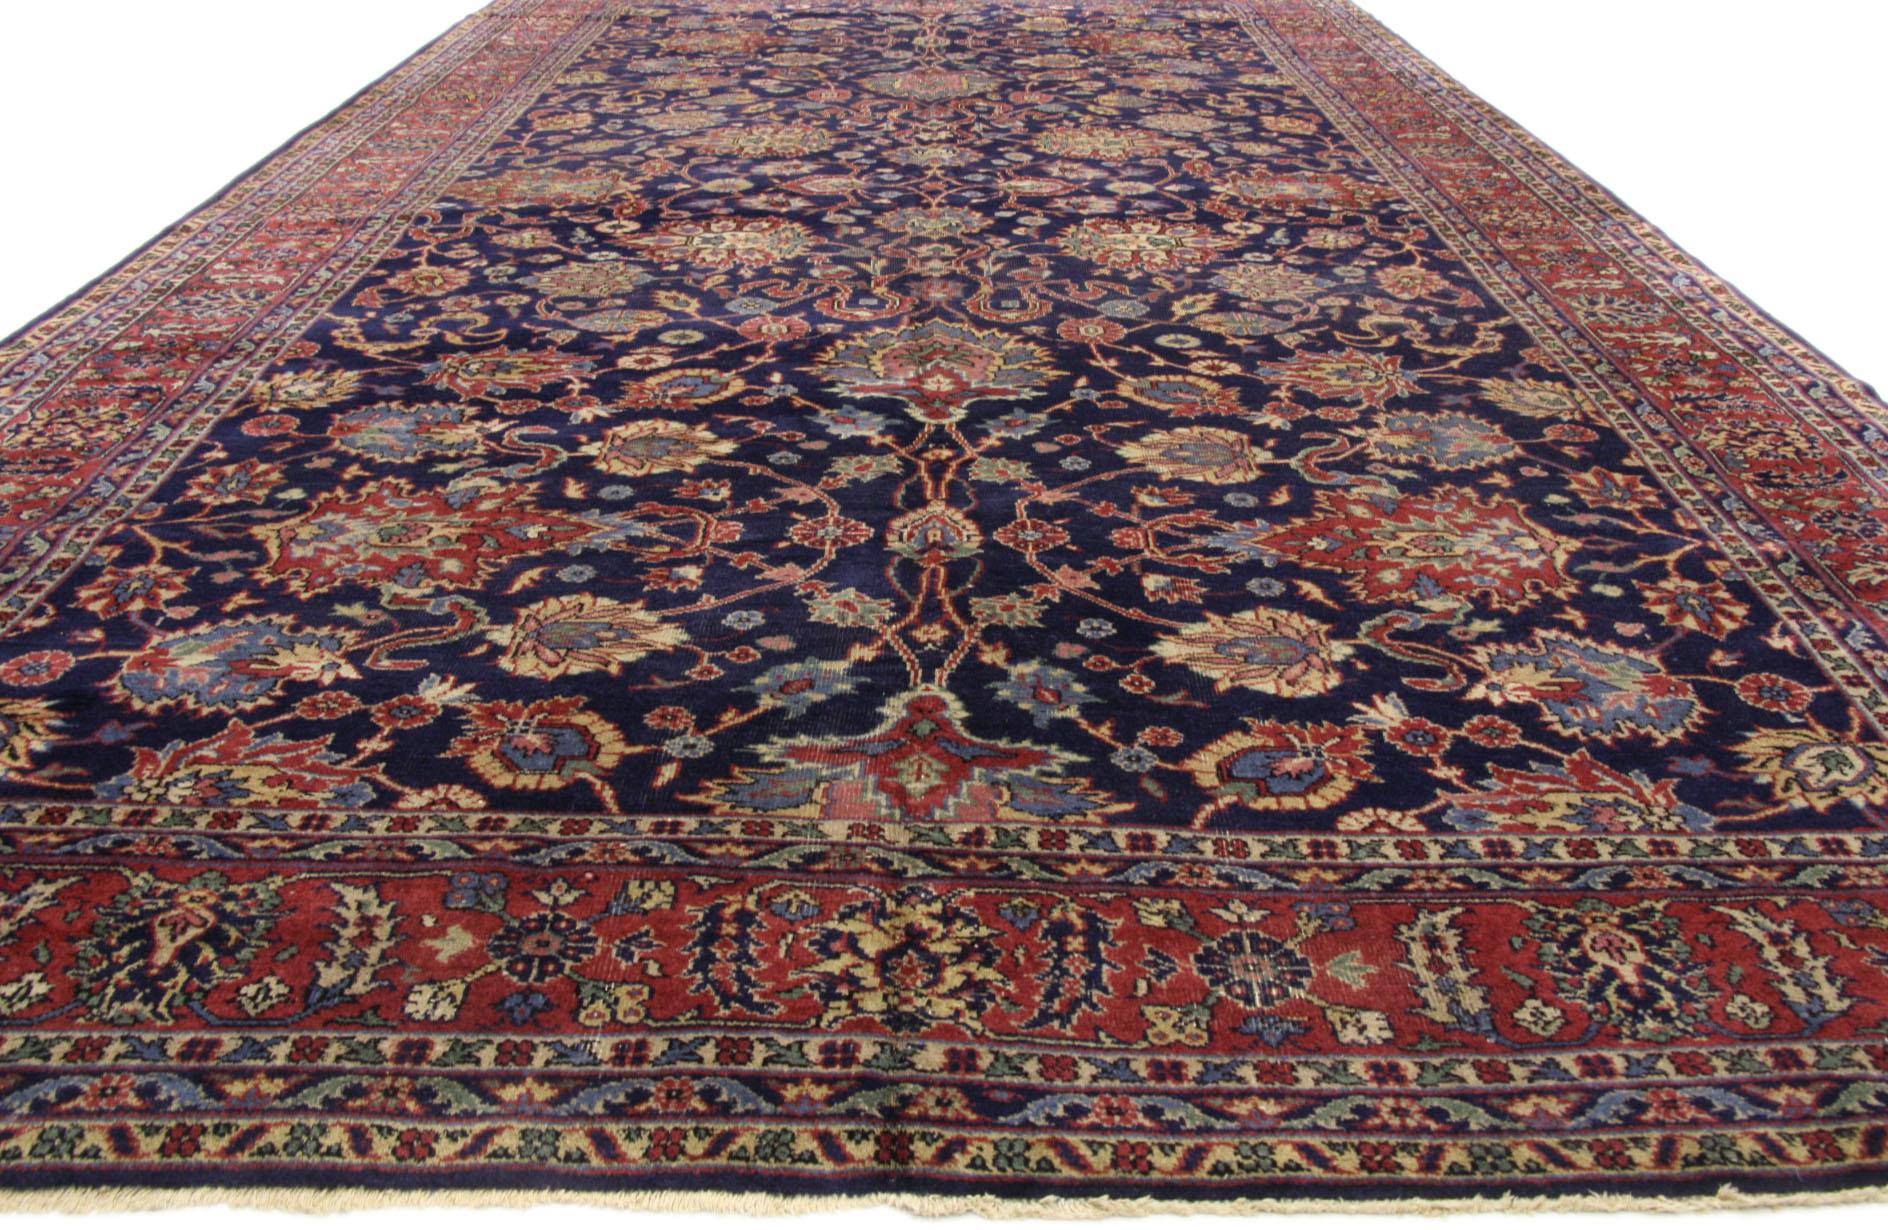 Modern Antique Turkish Blue Sparta Gallery Rug with Old World French Chateau Style 